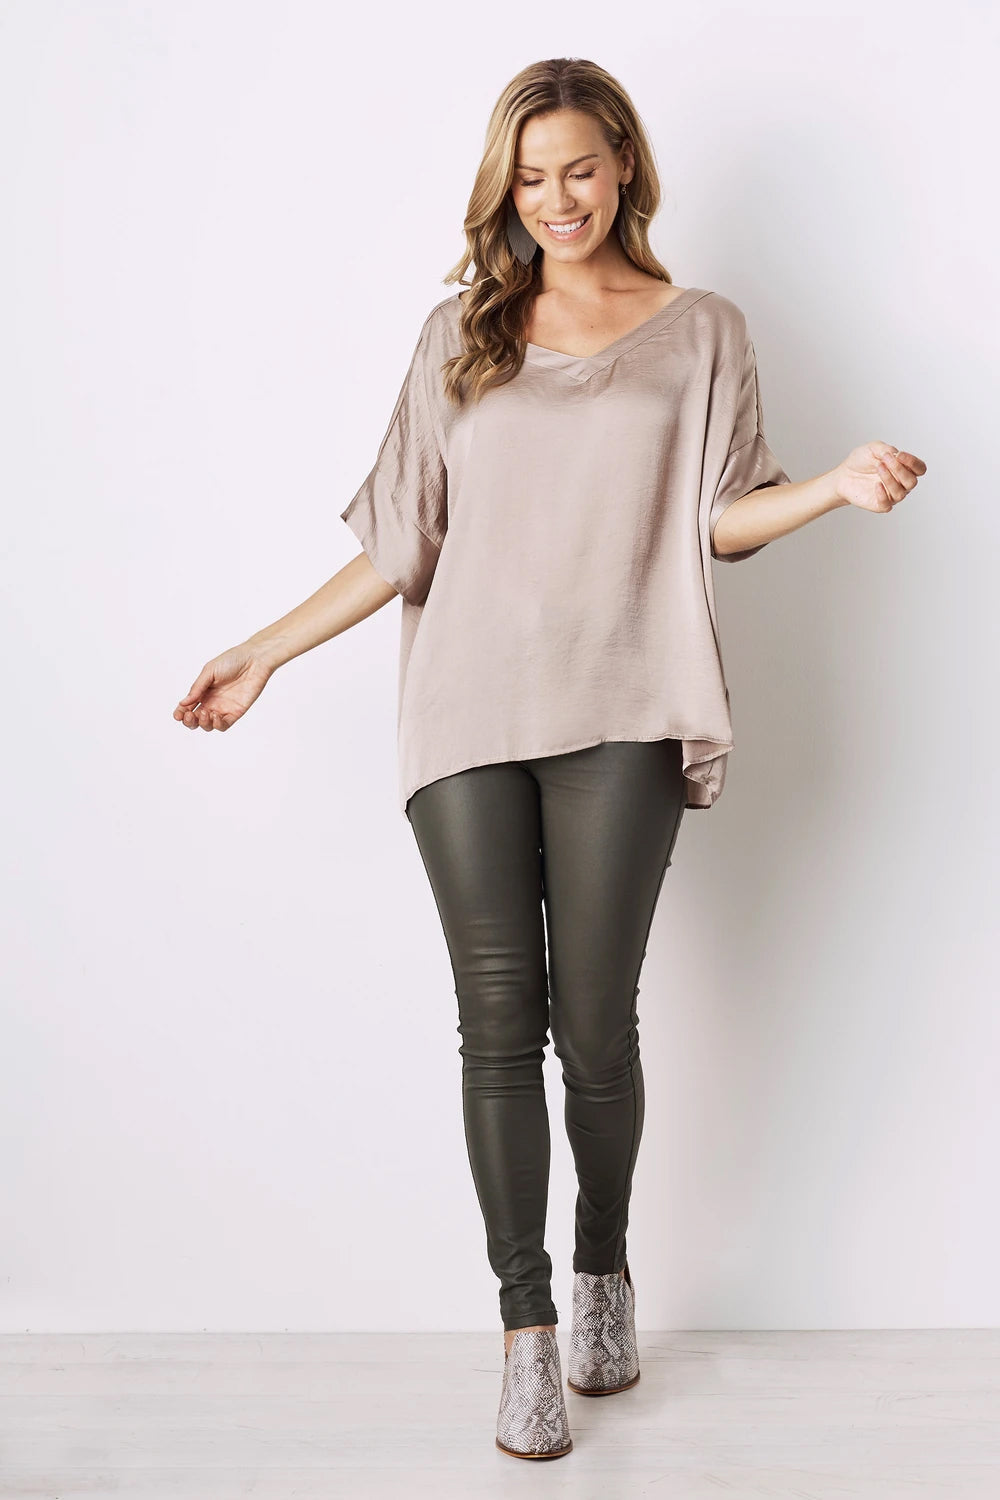 Bianca Short Sleeve Top Almond with V Neck Tops